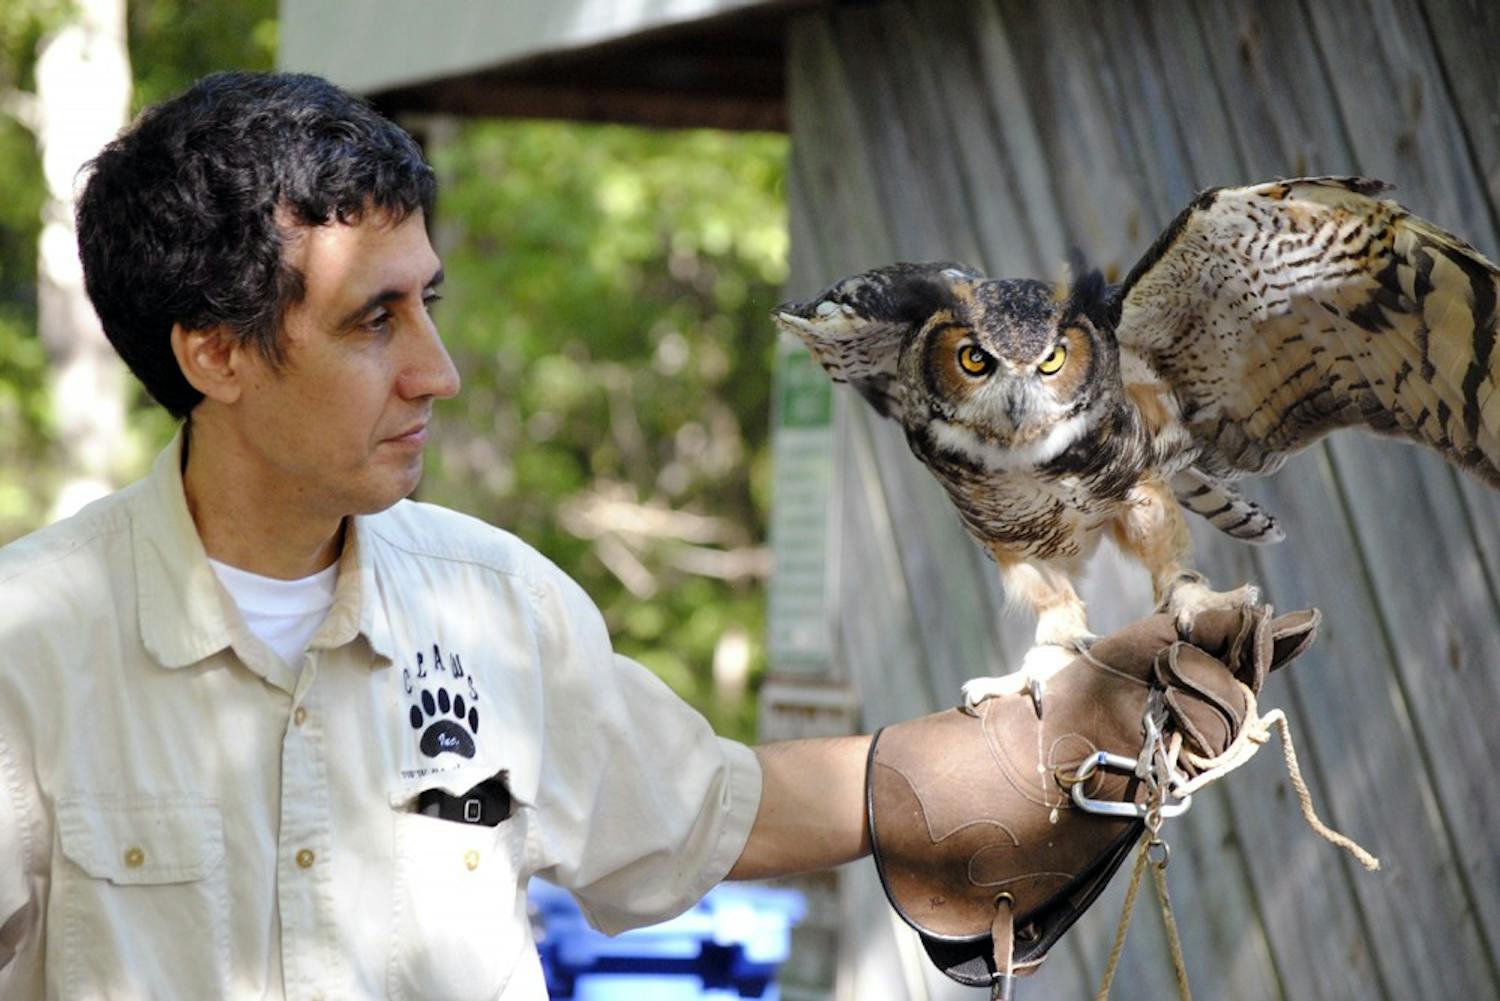 Vinny Mammone, treasurer for Claws Inc., holds one of the organization's permanent residents Khalitra, a great horned owl who is blind in one eye.